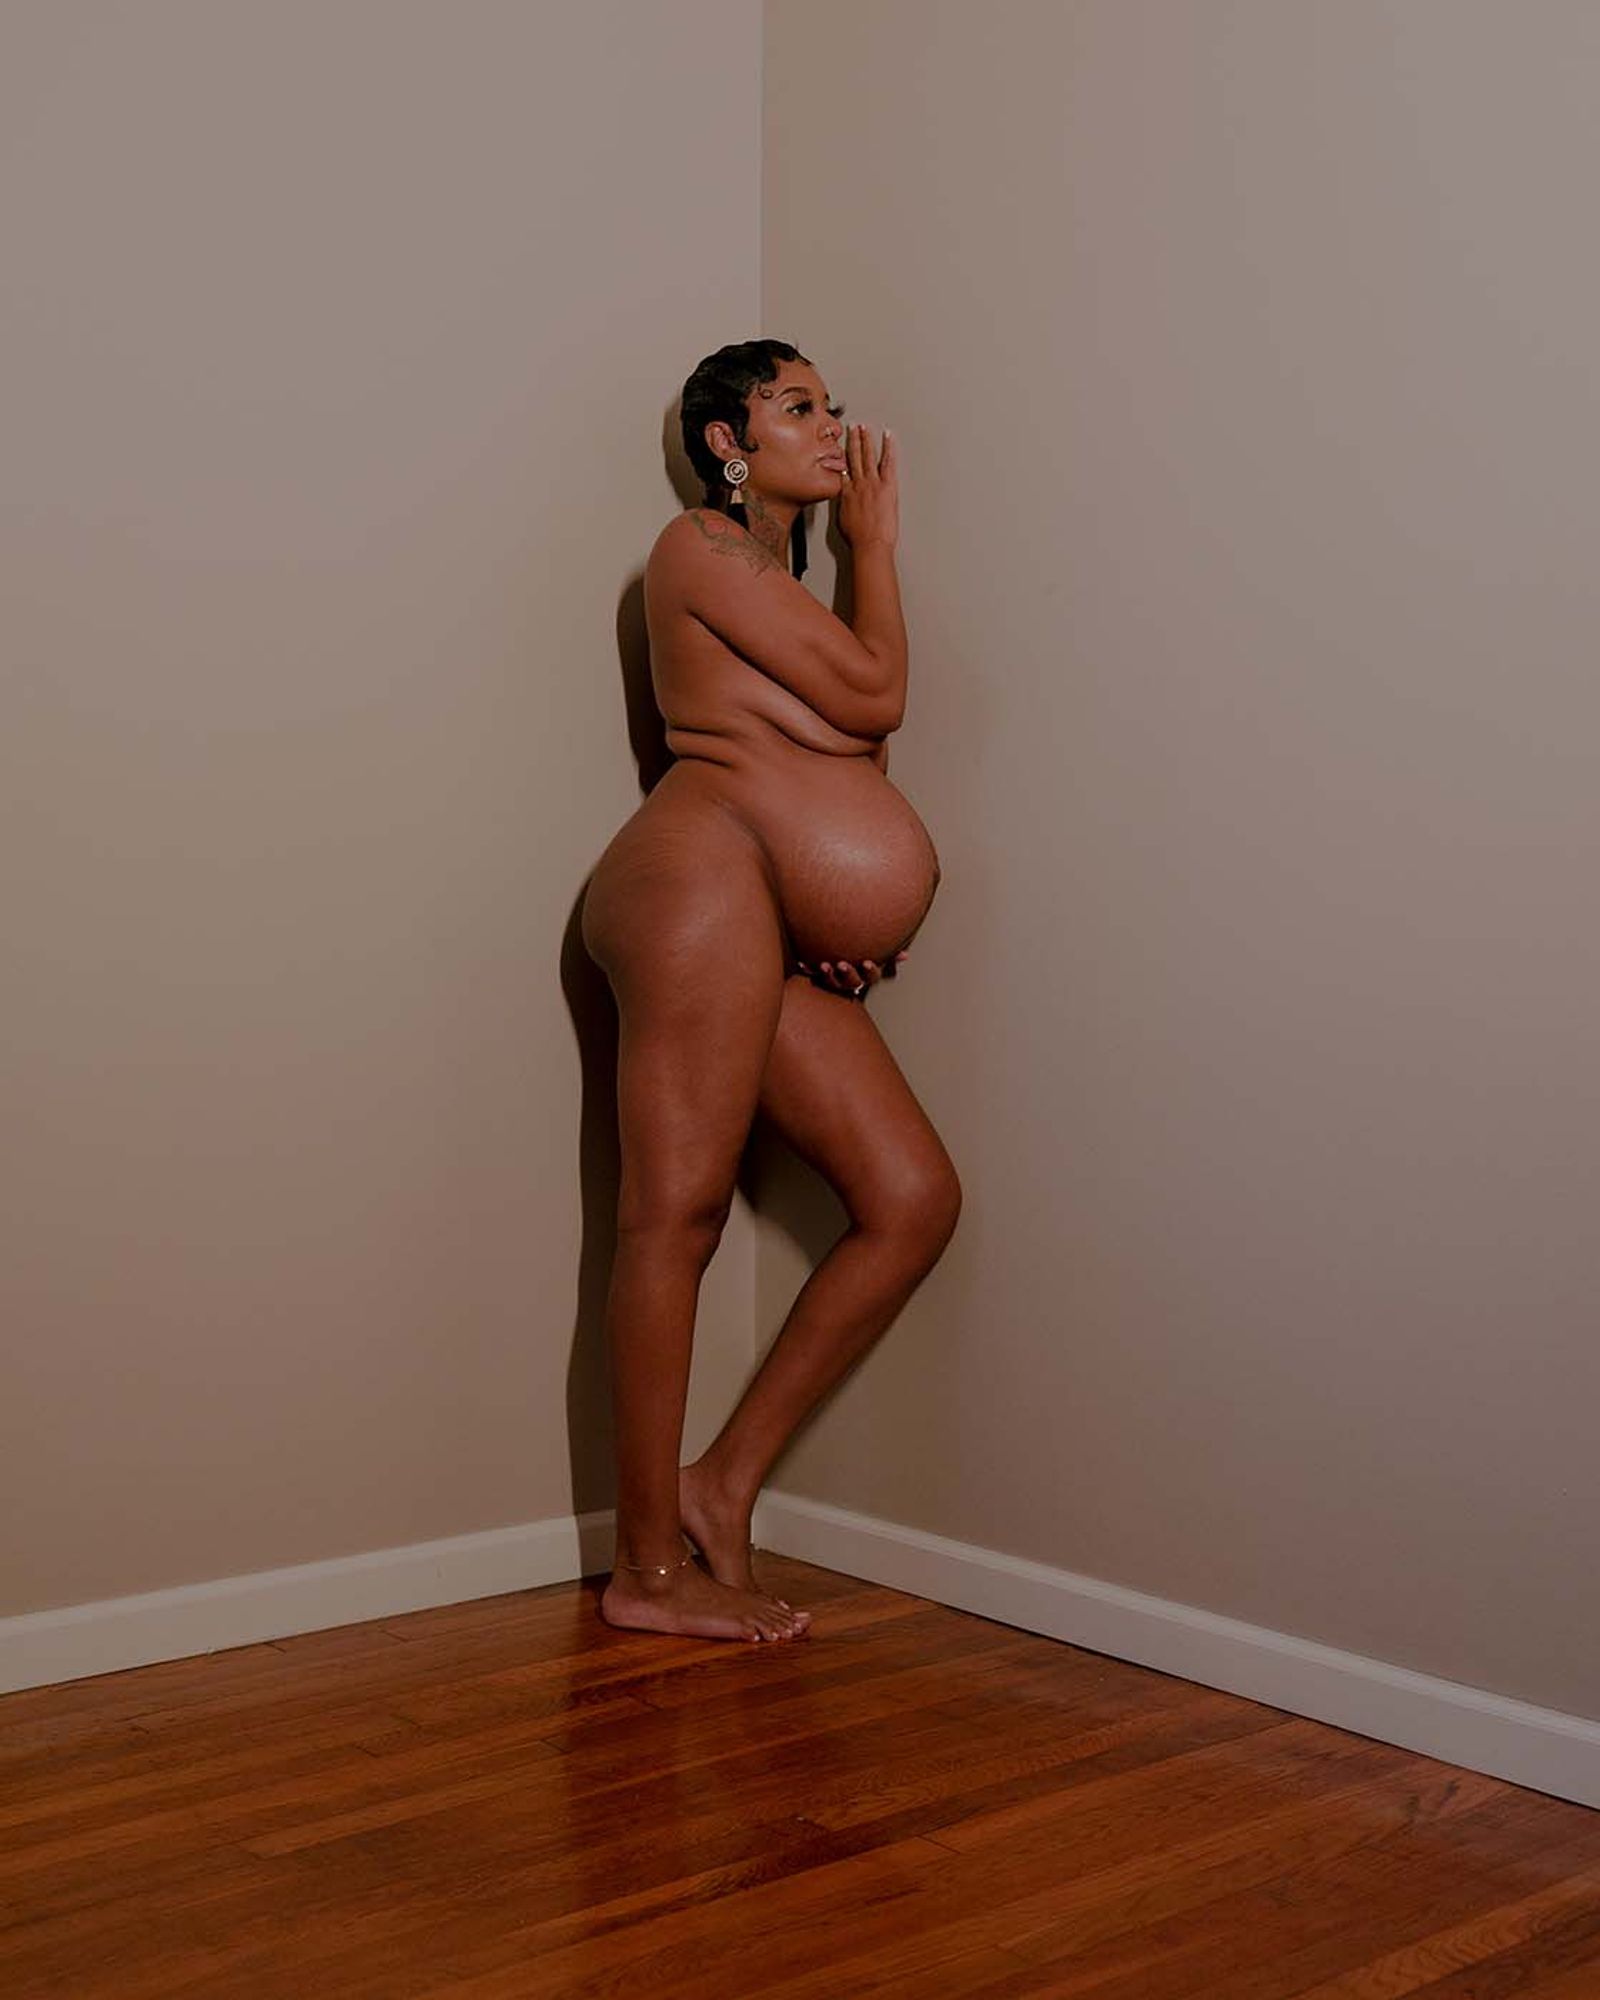 8 Black Female Photographers to Watch in 2022